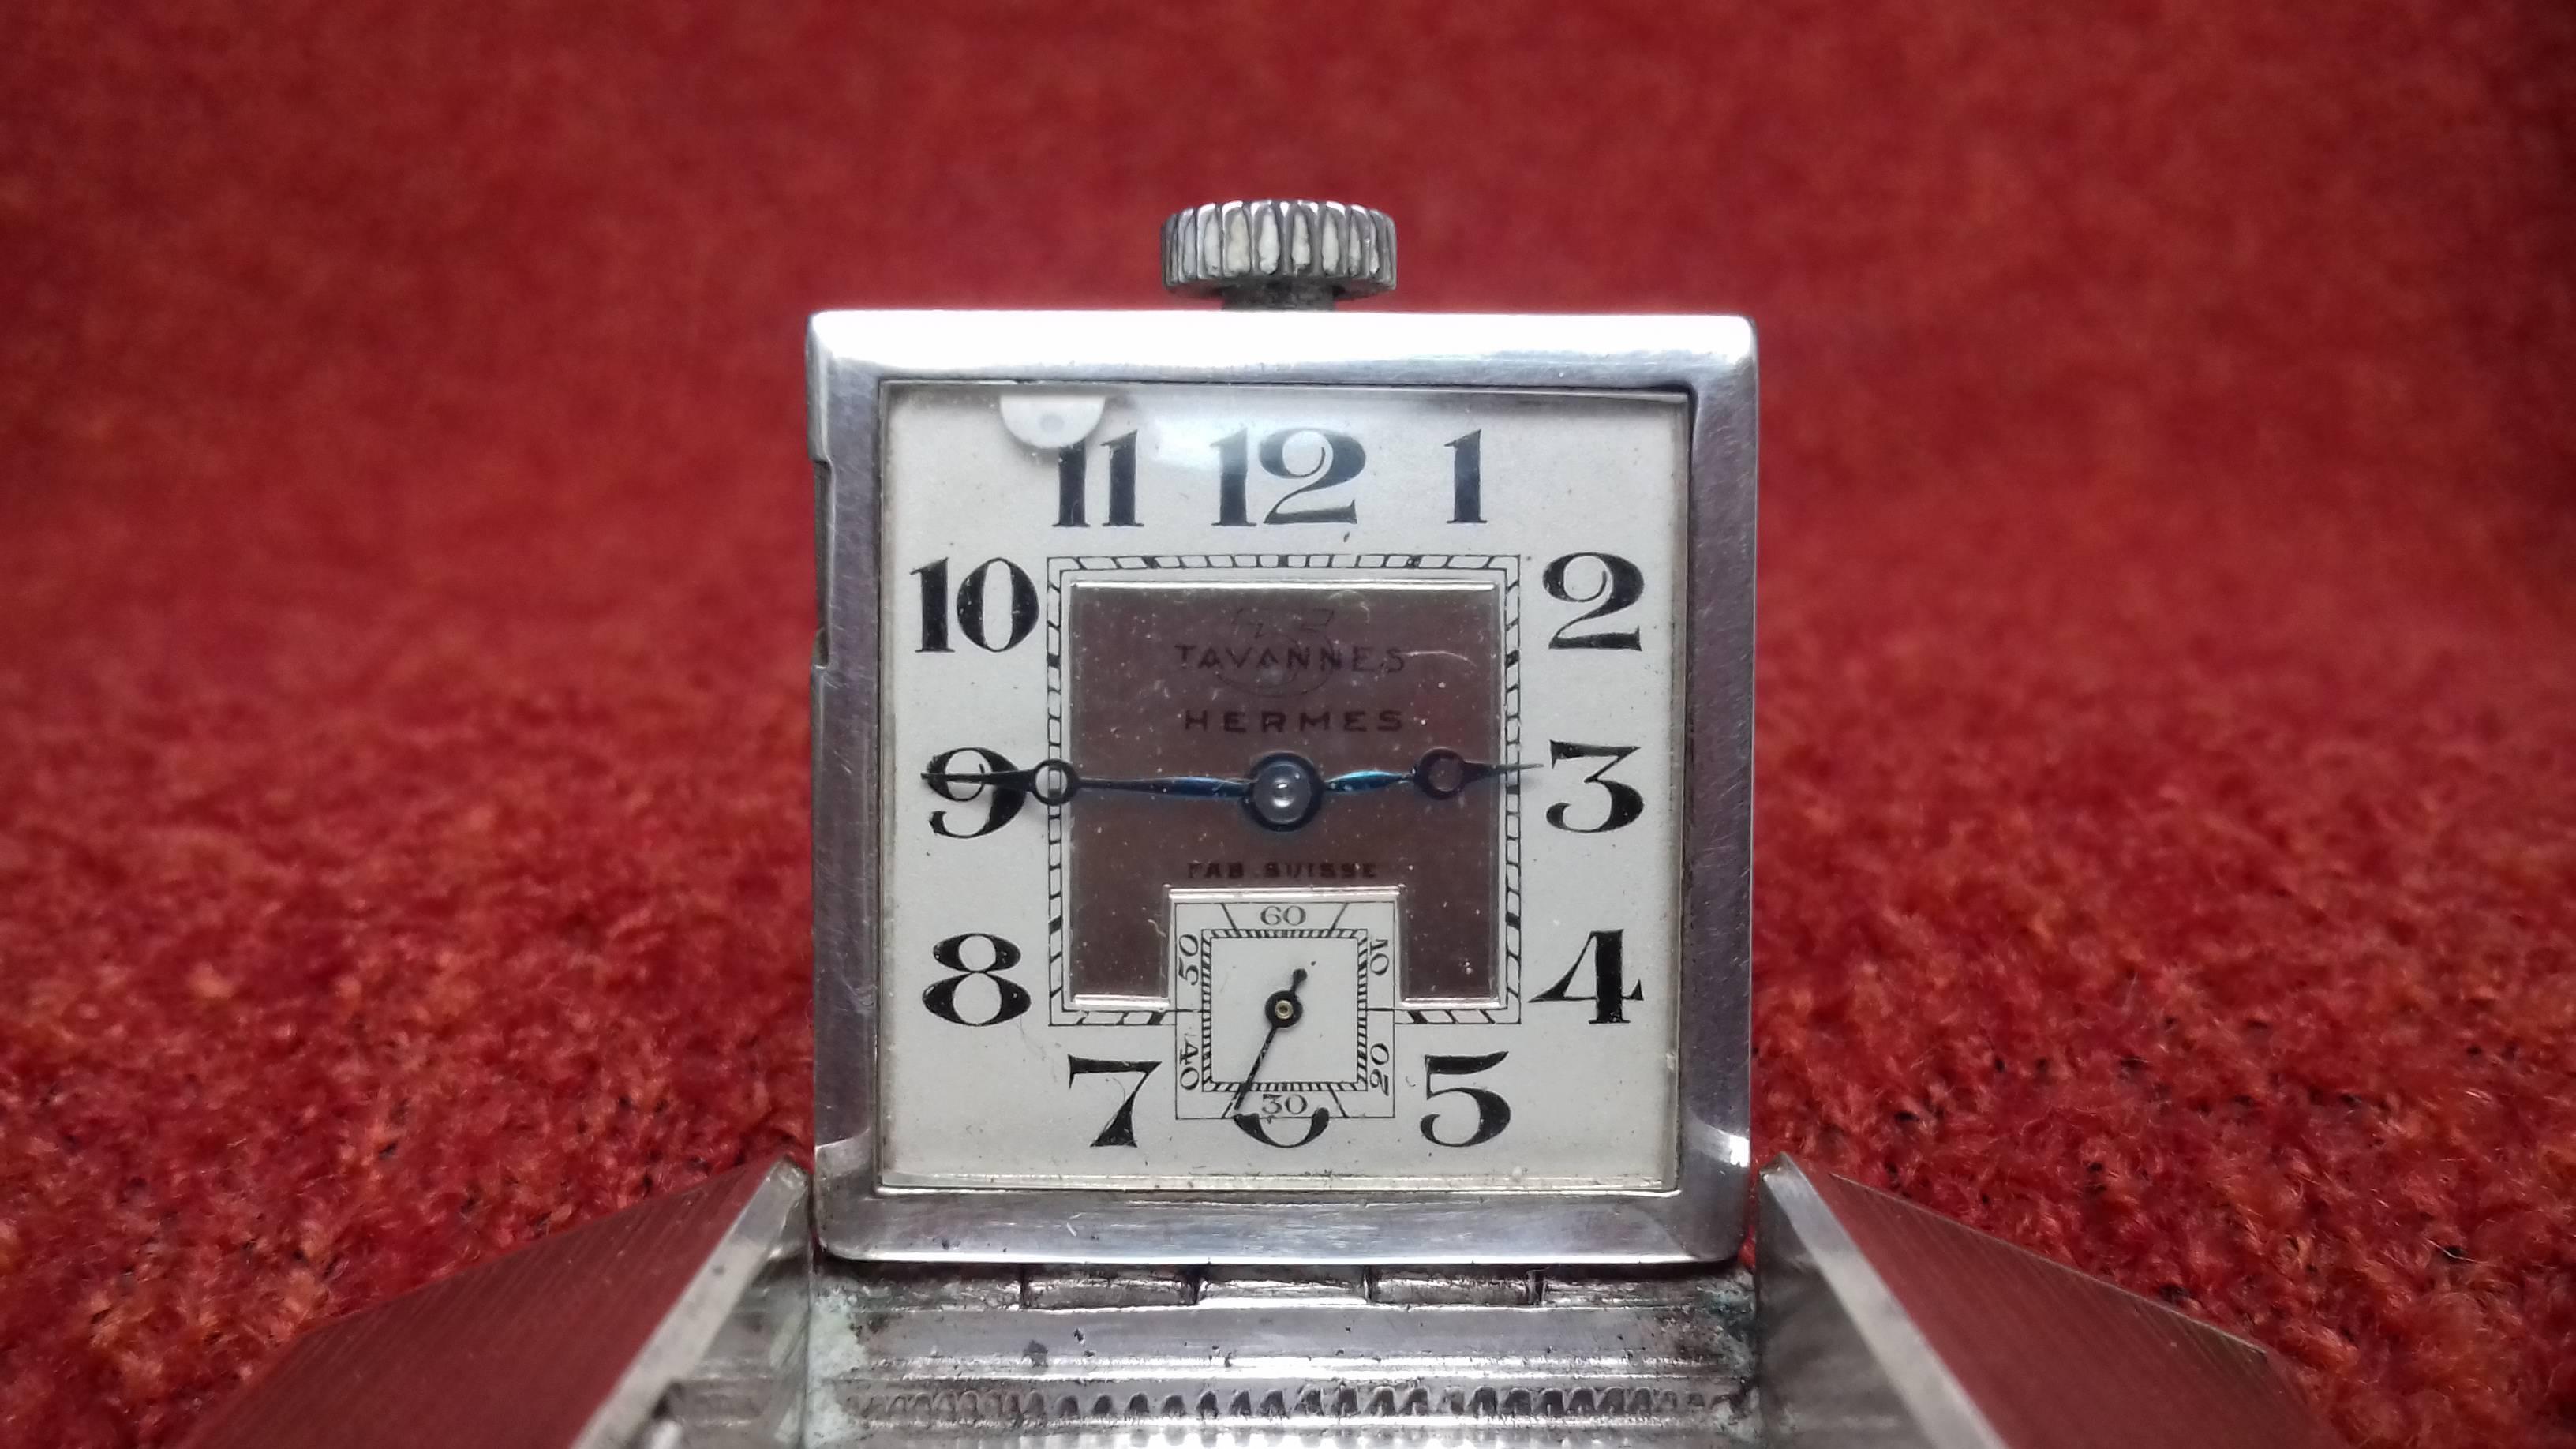 Rare and Beautiful Authentic TAVANNES HERMES Watch

Originally made for golfers

Made of Sterling Silver 935

Around 1930's

The buckle is grooved

The dial gets up by a push-button

Dial cream and black arabic numerals painted

Watch shows hours,